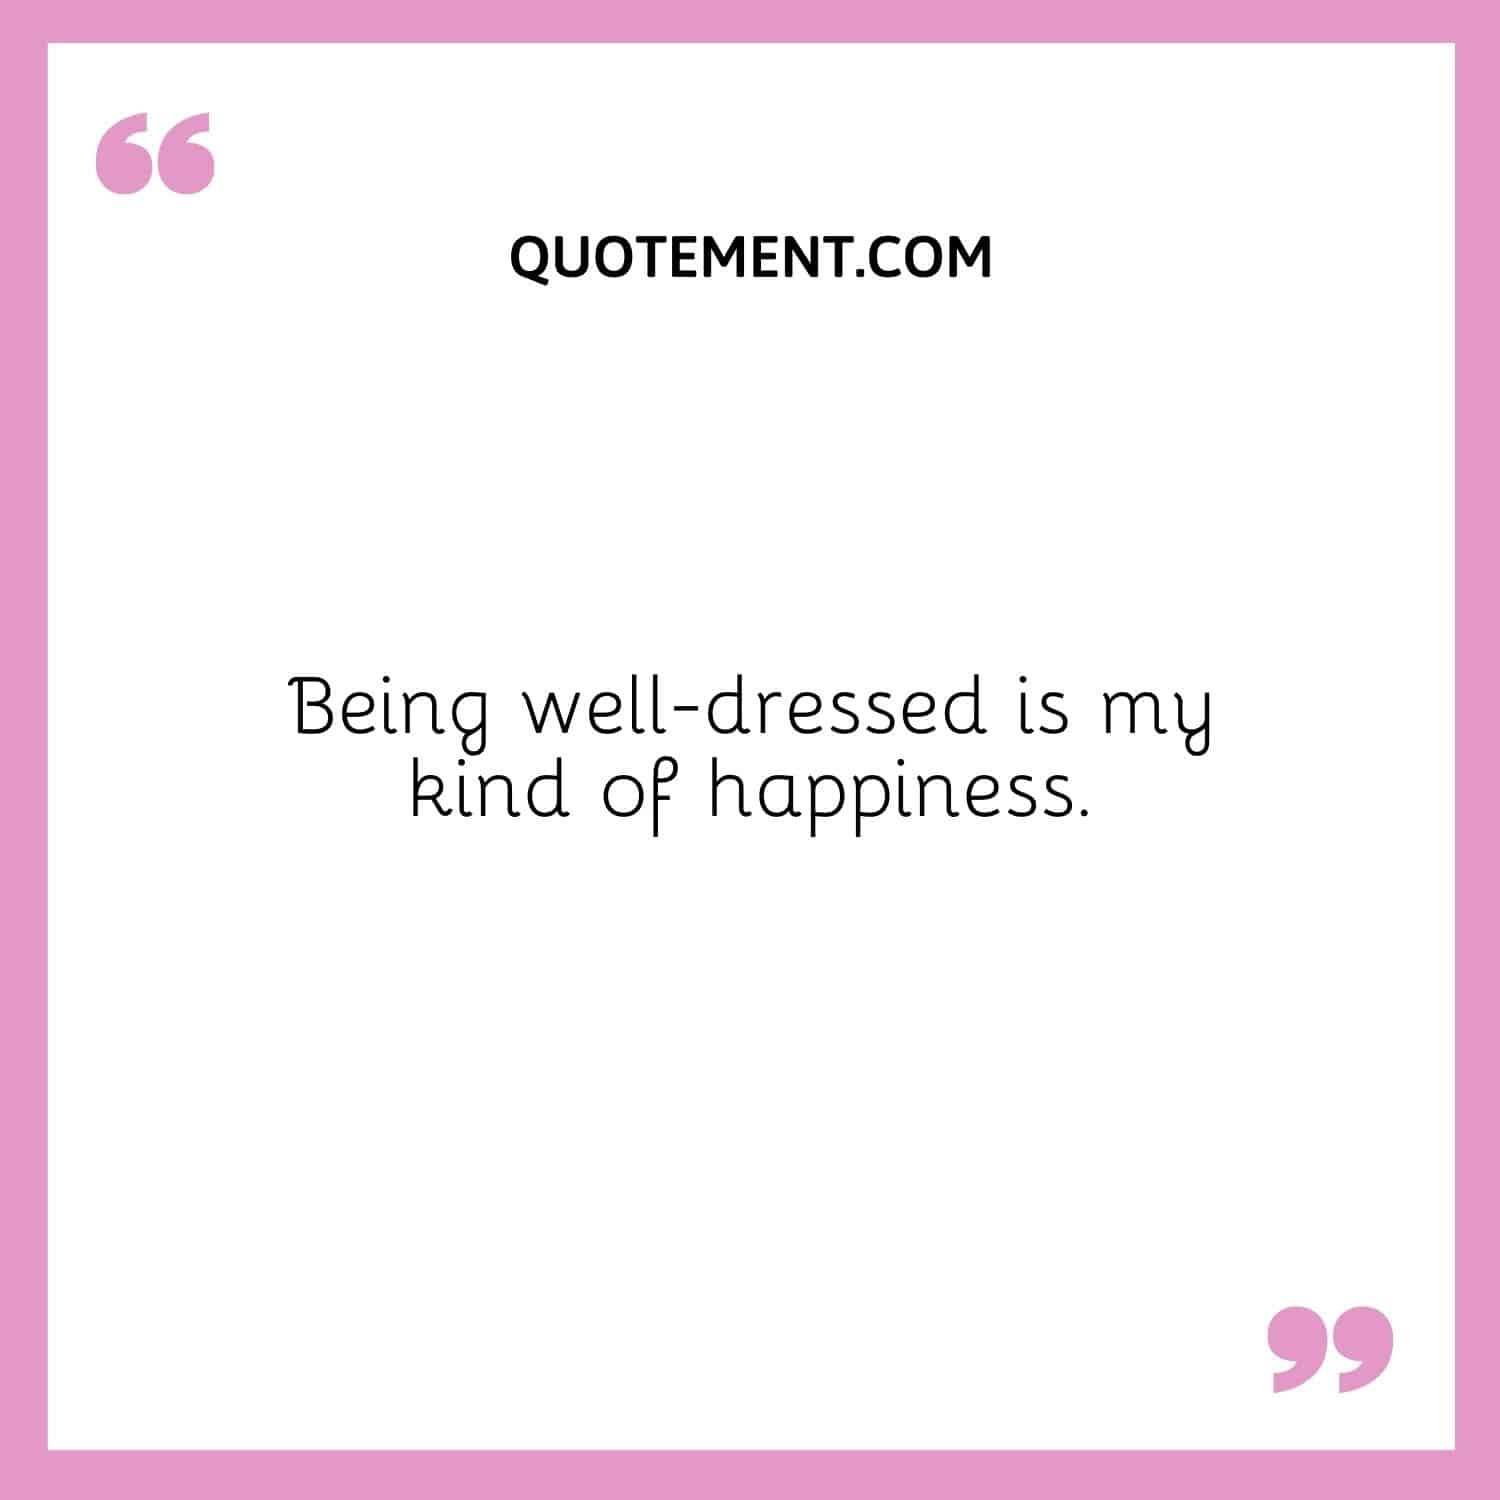 Being well-dressed is my kind of happiness.